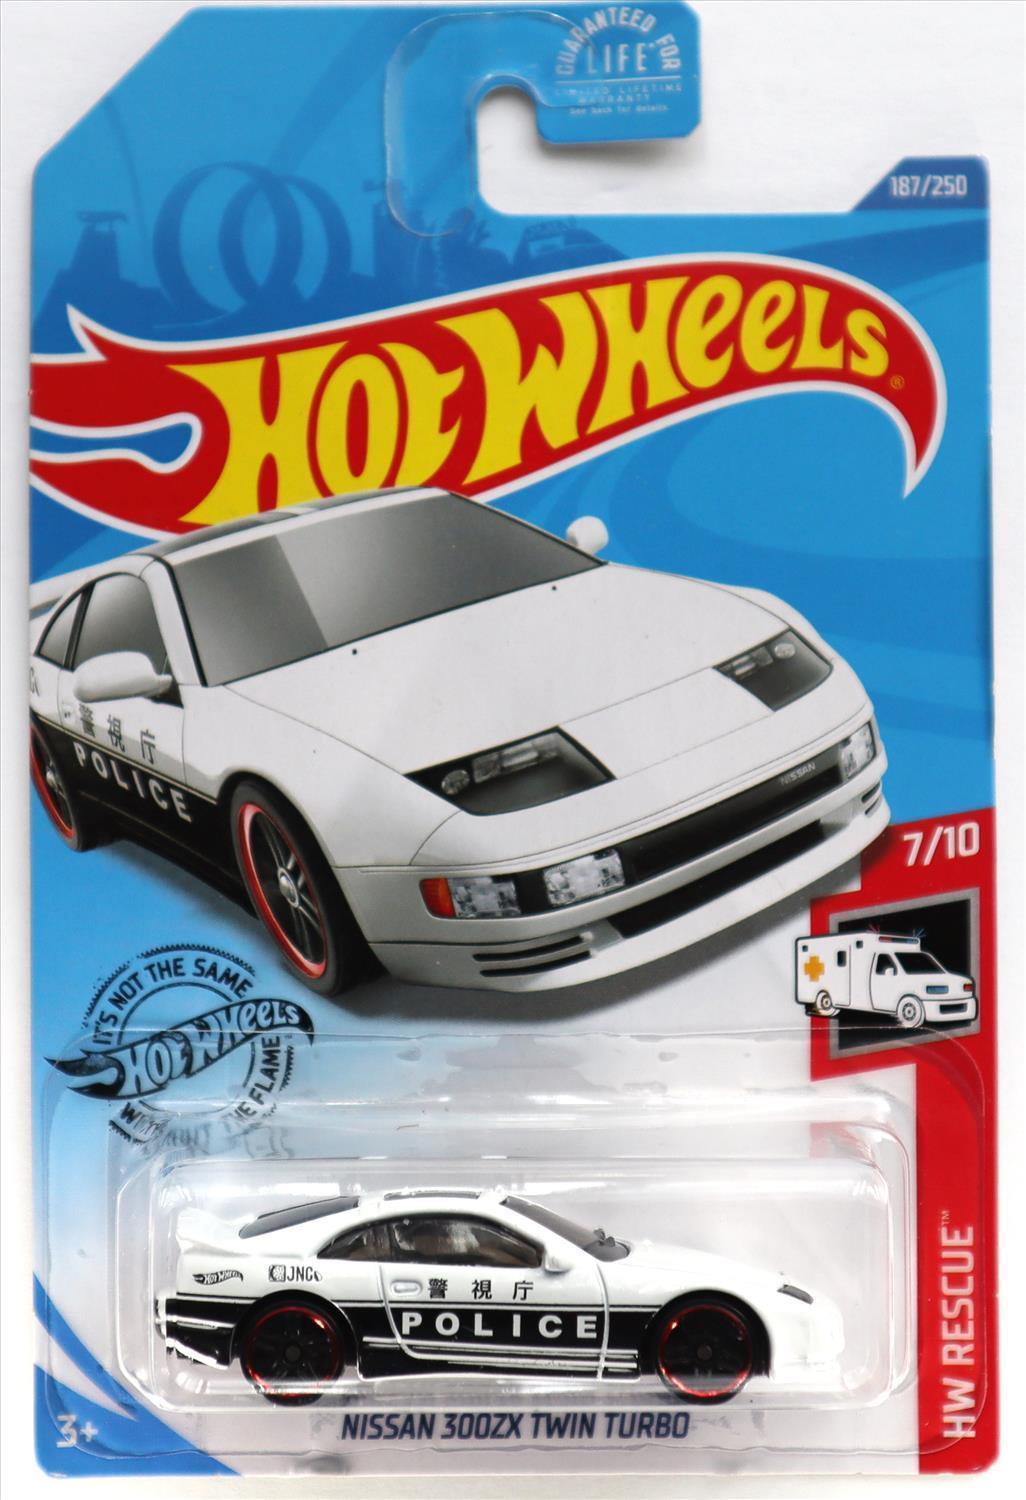 Hot Wheels 2020 - Collector # 187/250 - HW Rescue 7/10 - Nissan 300ZX Twin Turbo - White / Police